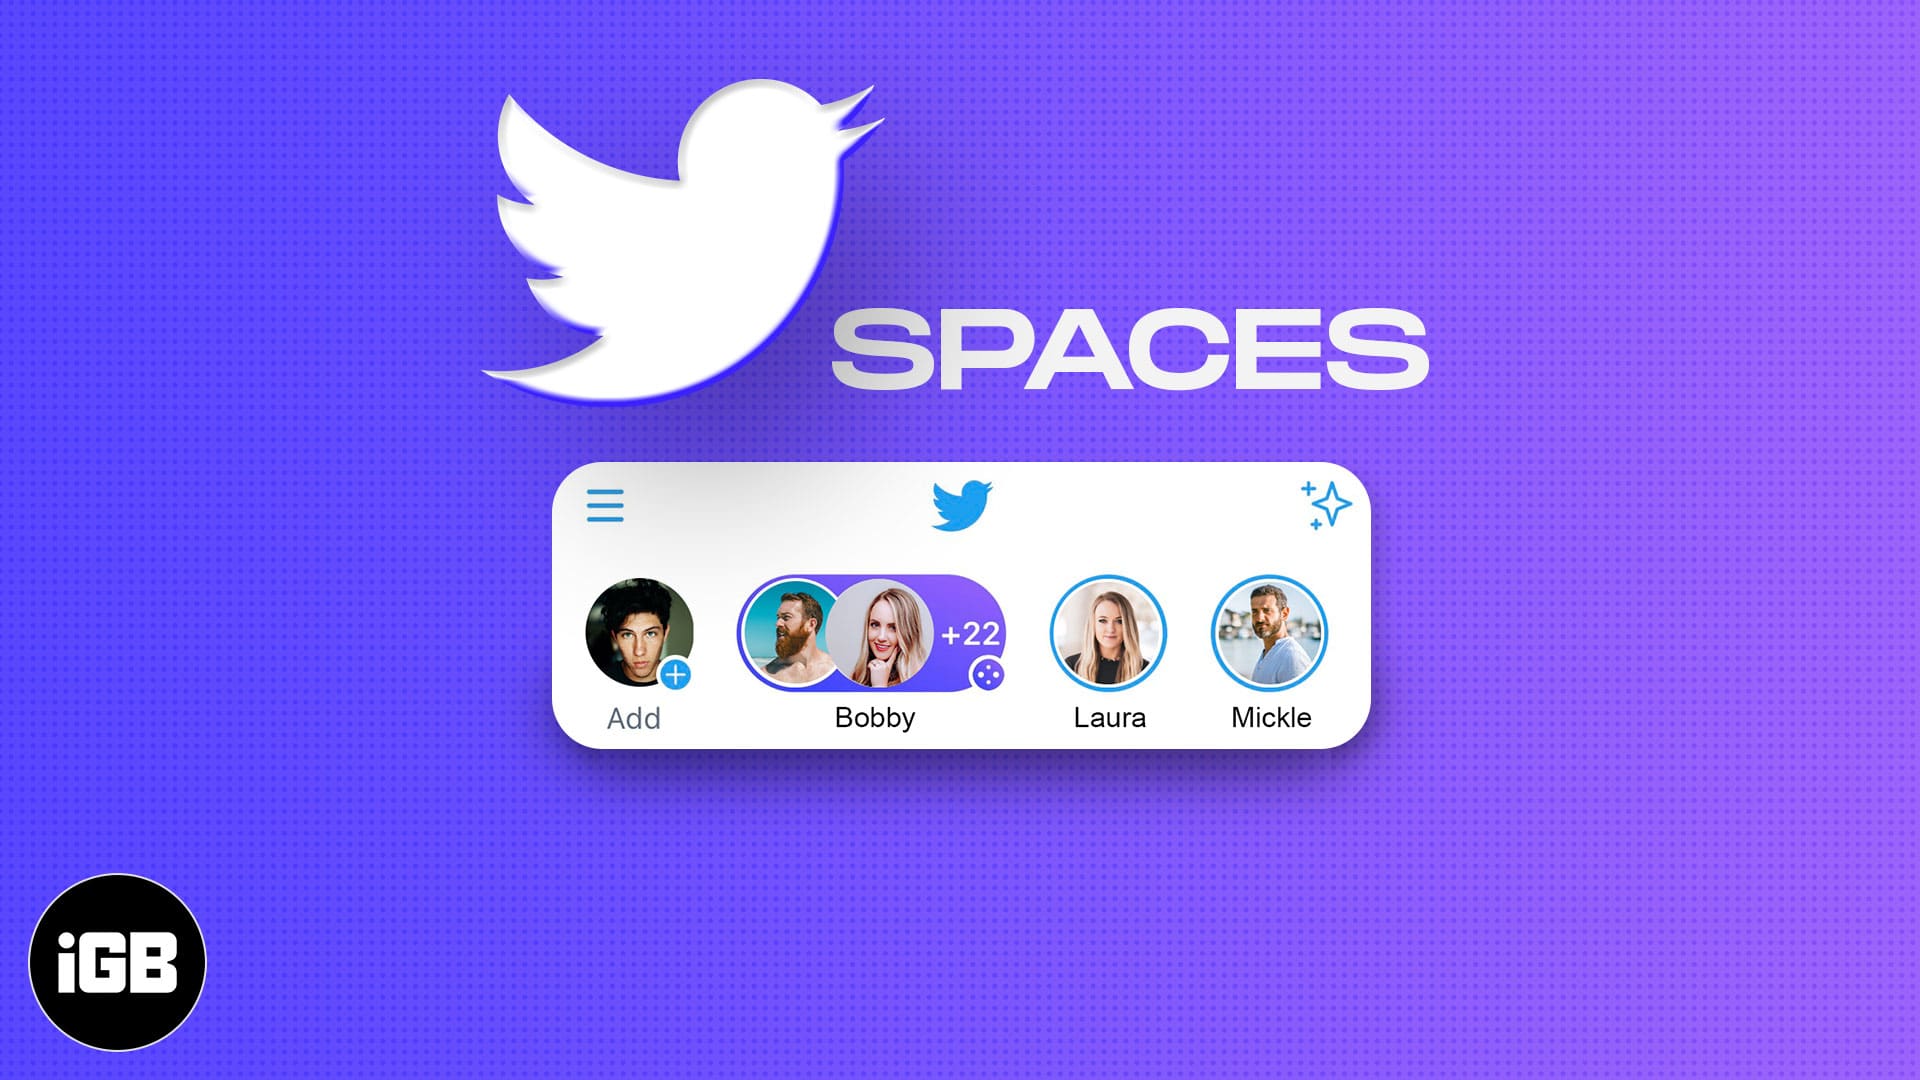 How to use Twitter Spaces on iPhone: A step-by-step guide